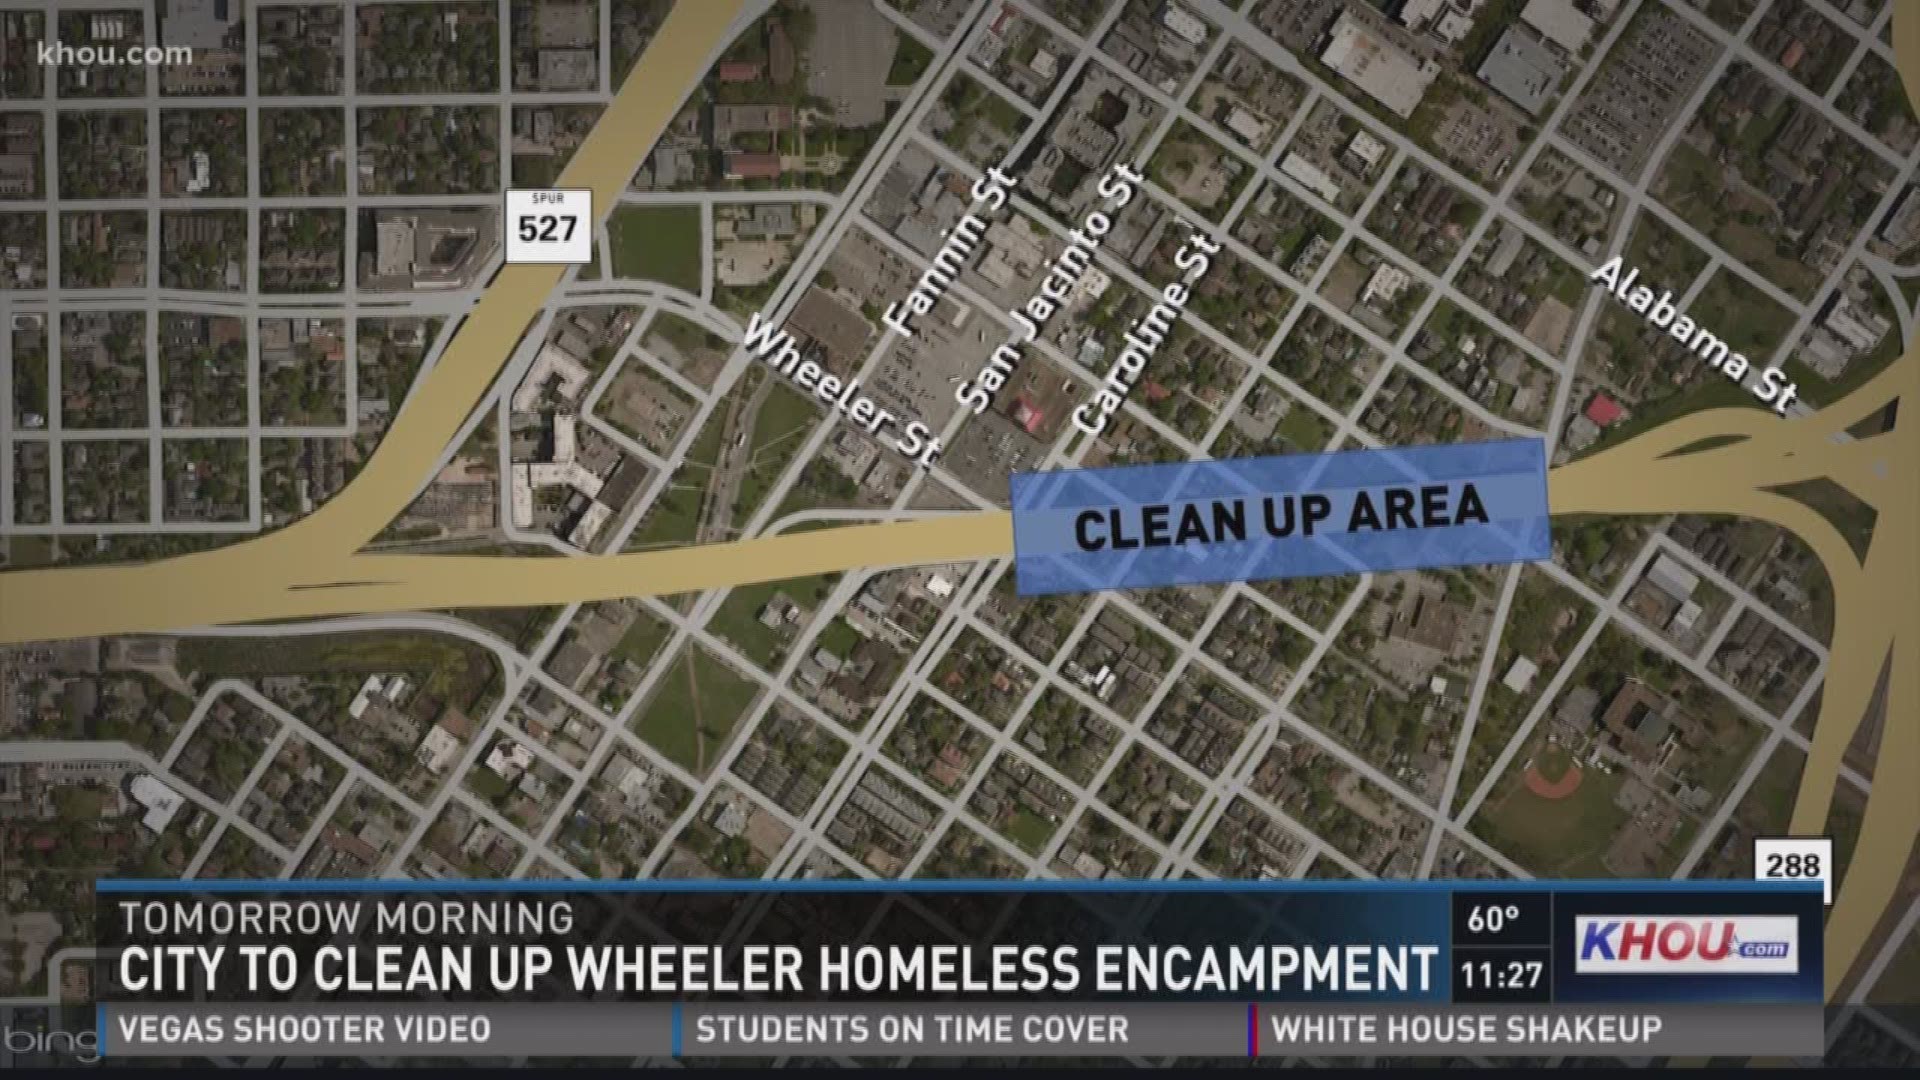 Mayor Sylvester Turner says the homeless camp near Wheeler under Highway 59 has become a public health hazard and is sending cleanup crews to the site Friday morning.